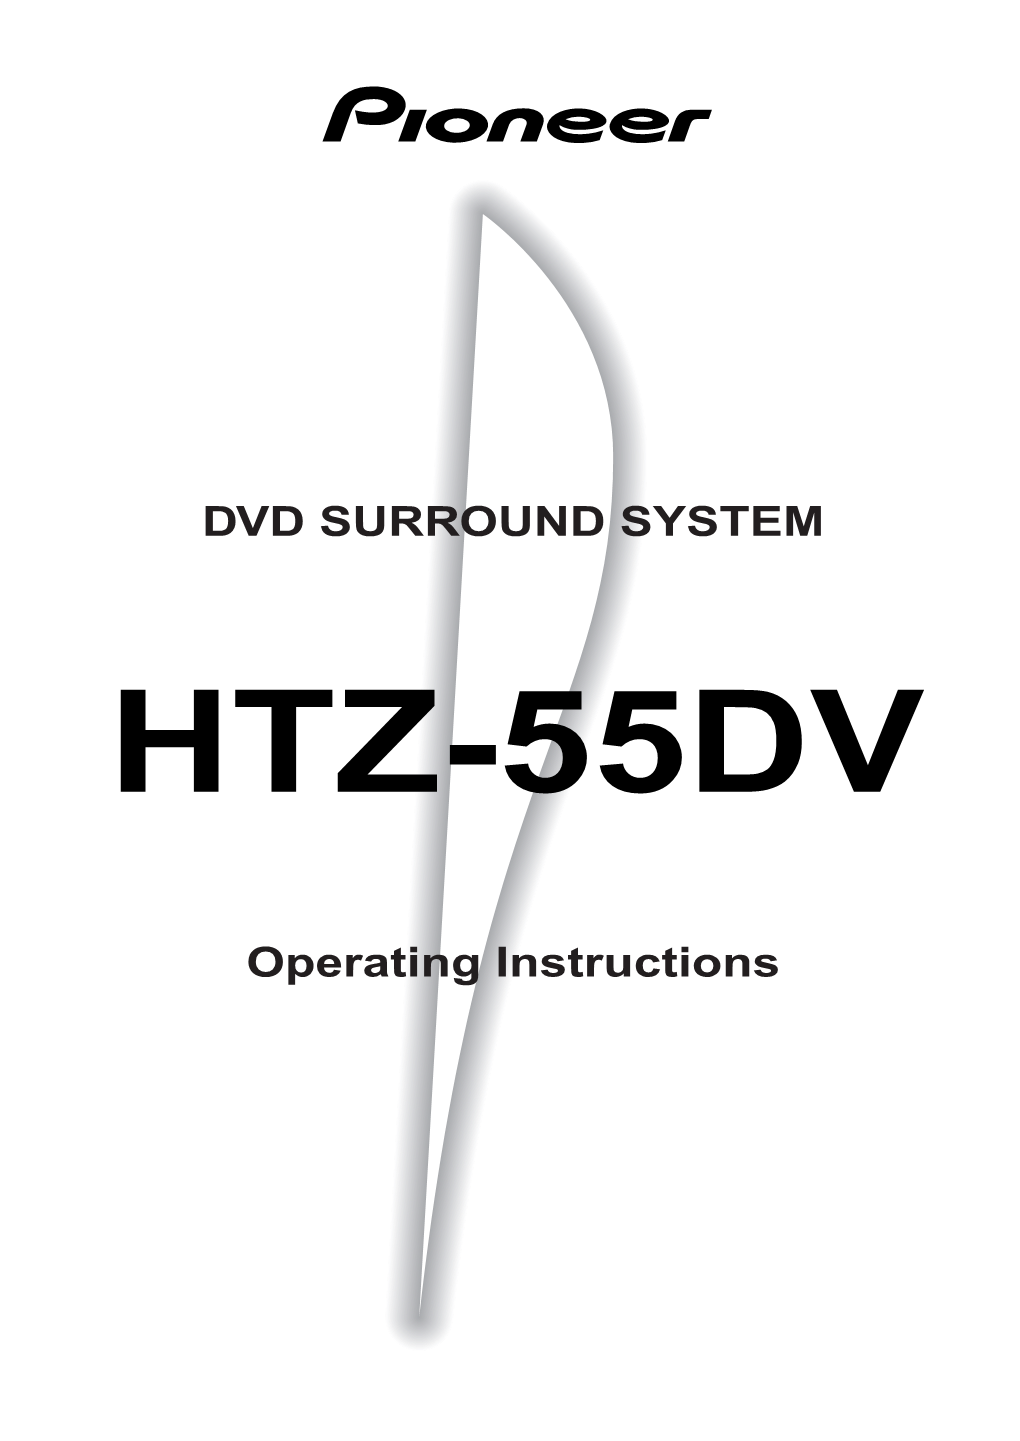 DVD SURROUND SYSTEM Operating Instructions